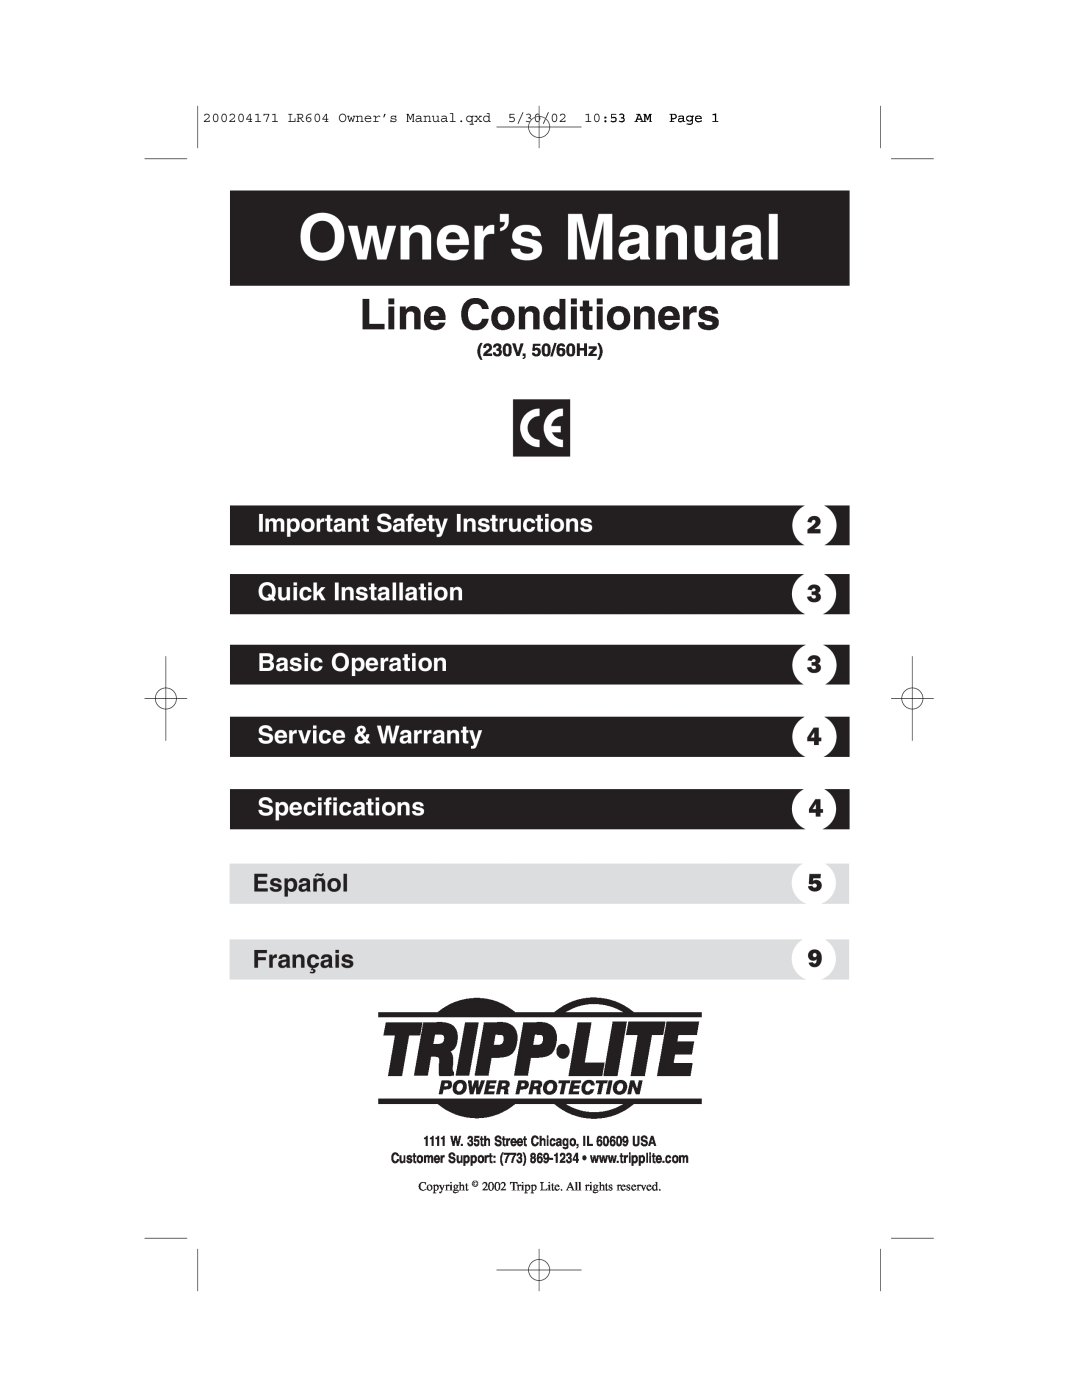 Tripp Lite 230V owner manual Line Conditioners, Important Safety Instructions, Quick Installation, Basic Operation 